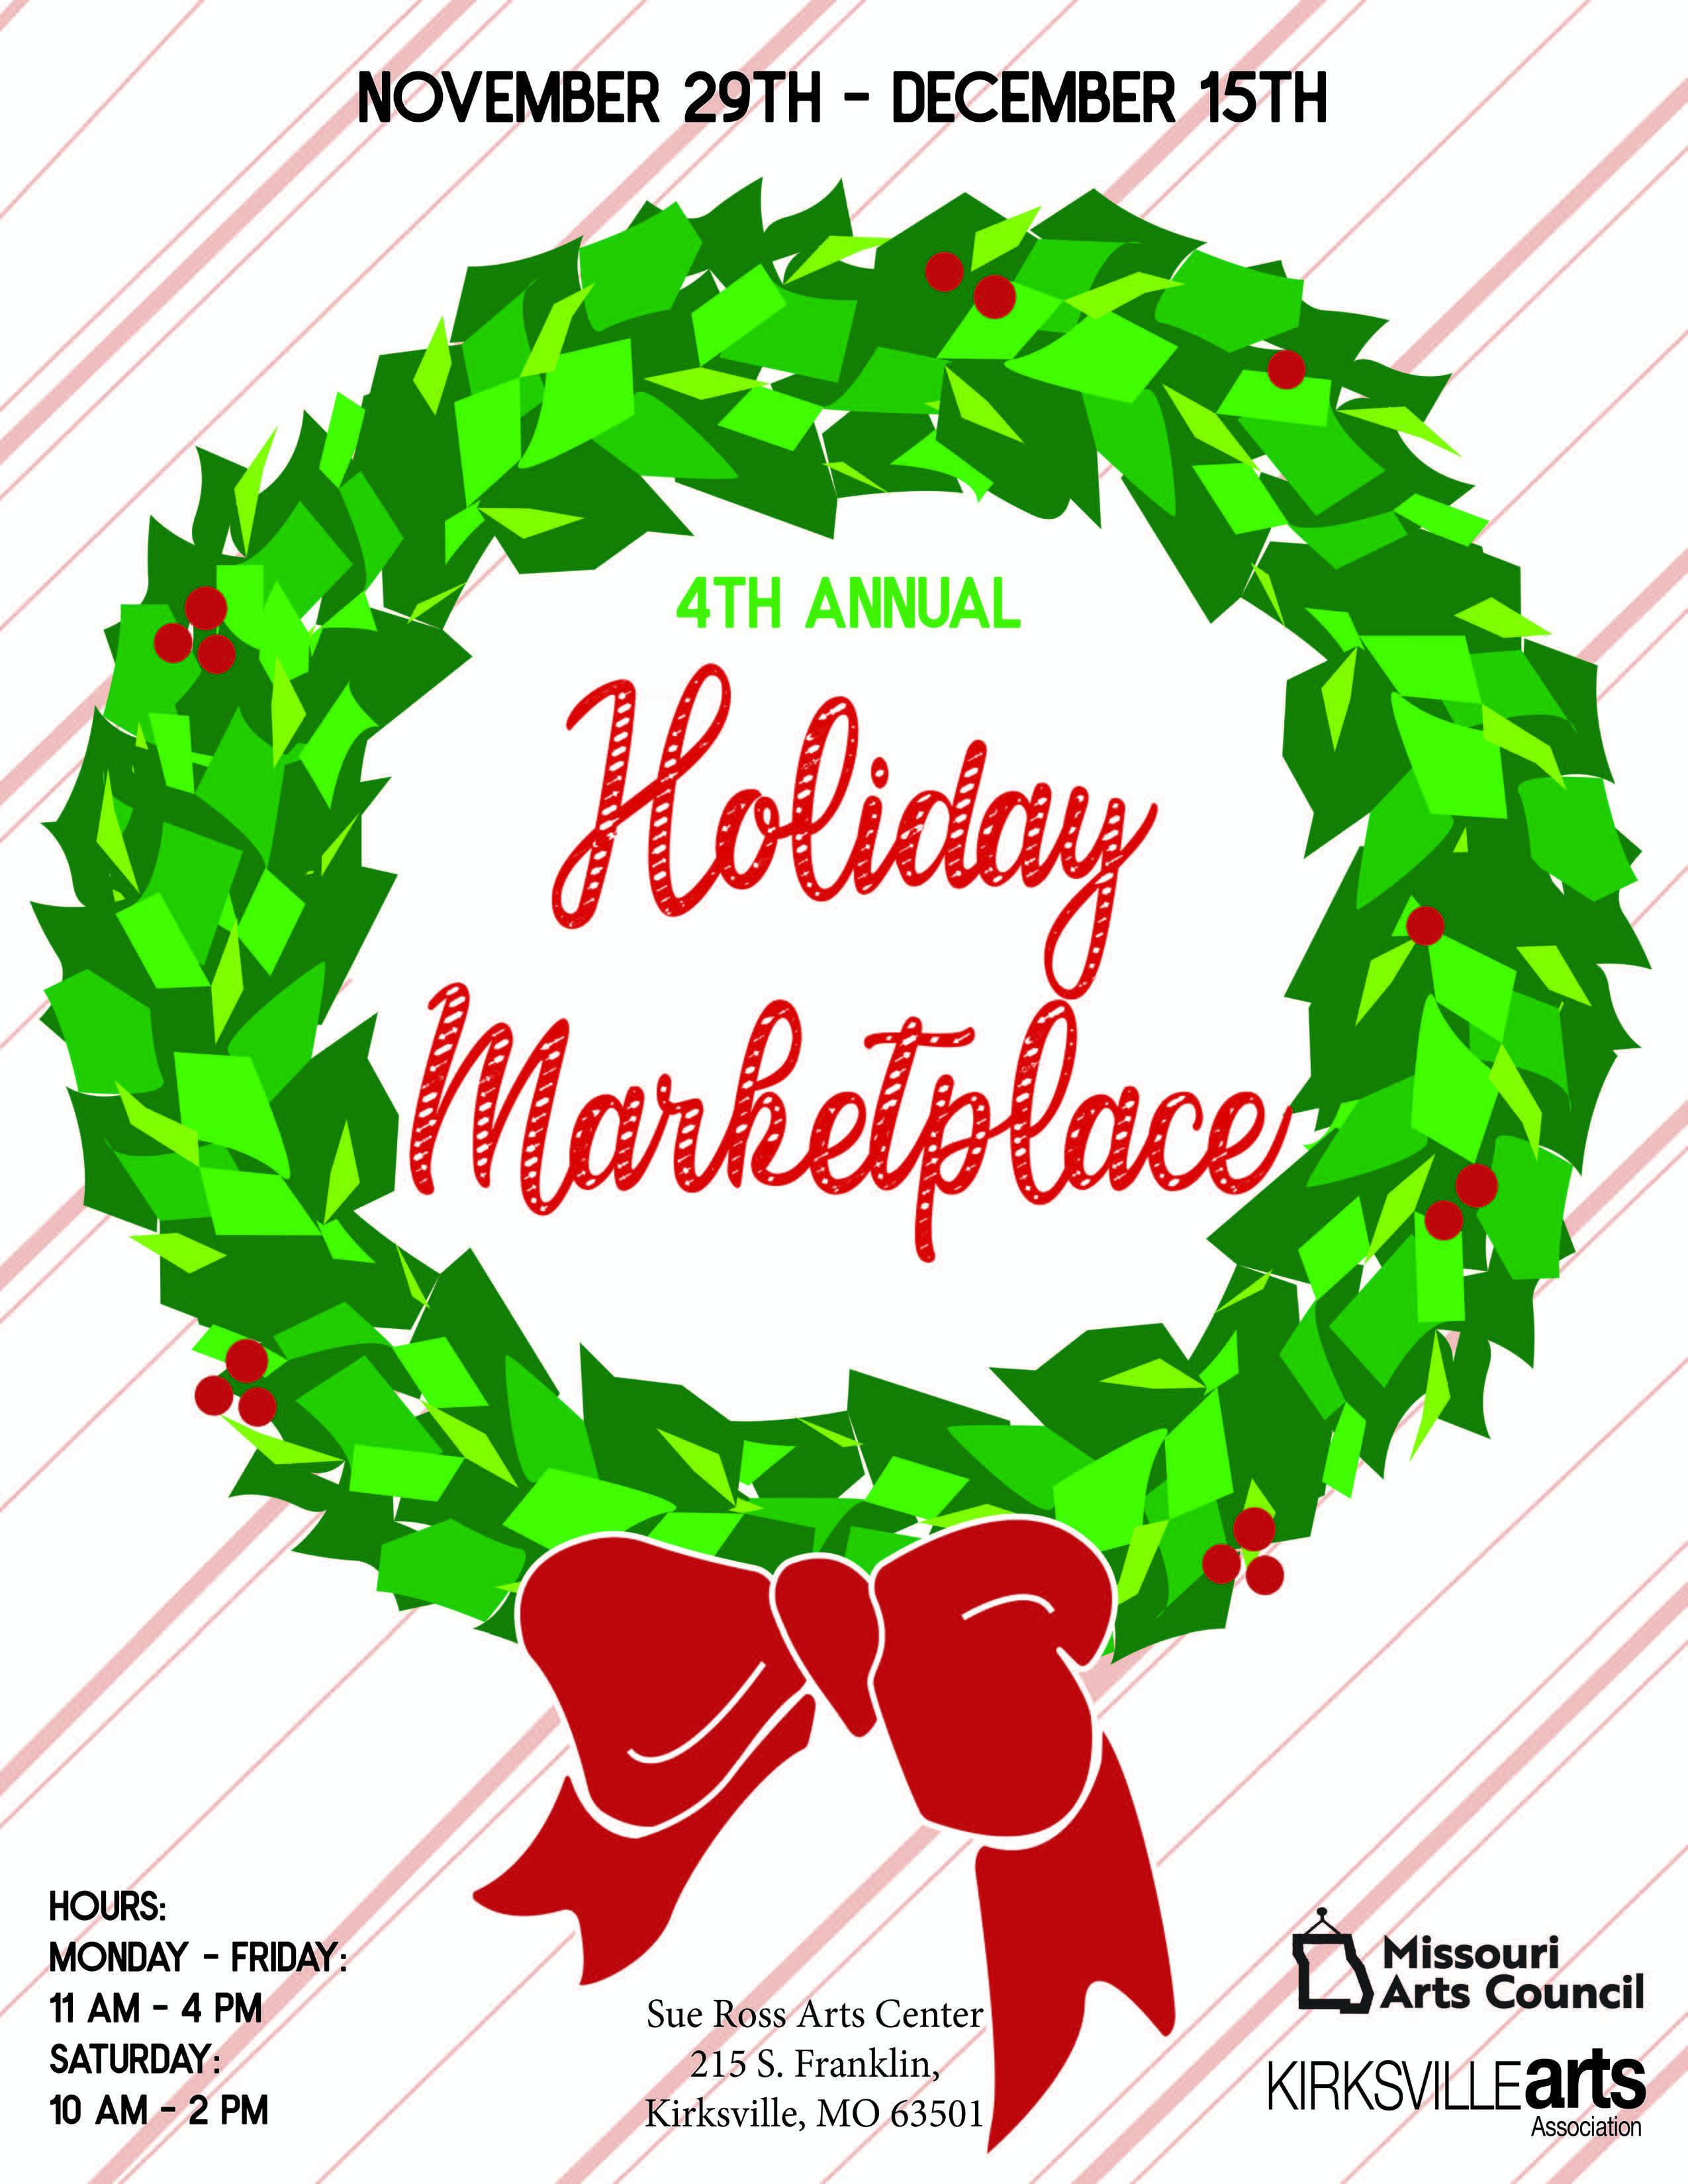 Check more about Holiday Market